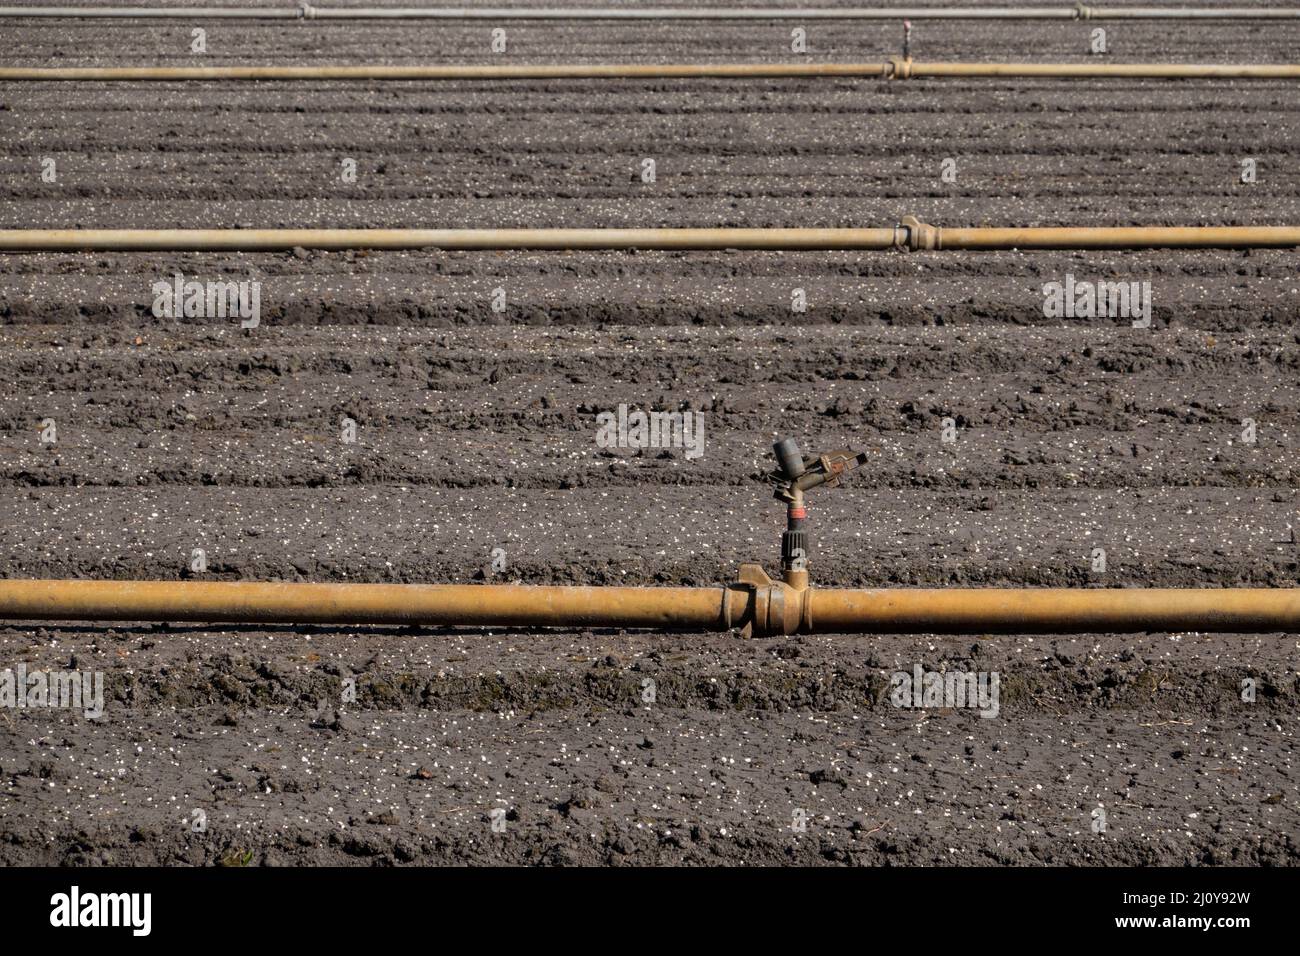 Preparation of a field for cultivation of Lilies; hoses for water supply and sprinkling installation Stock Photo